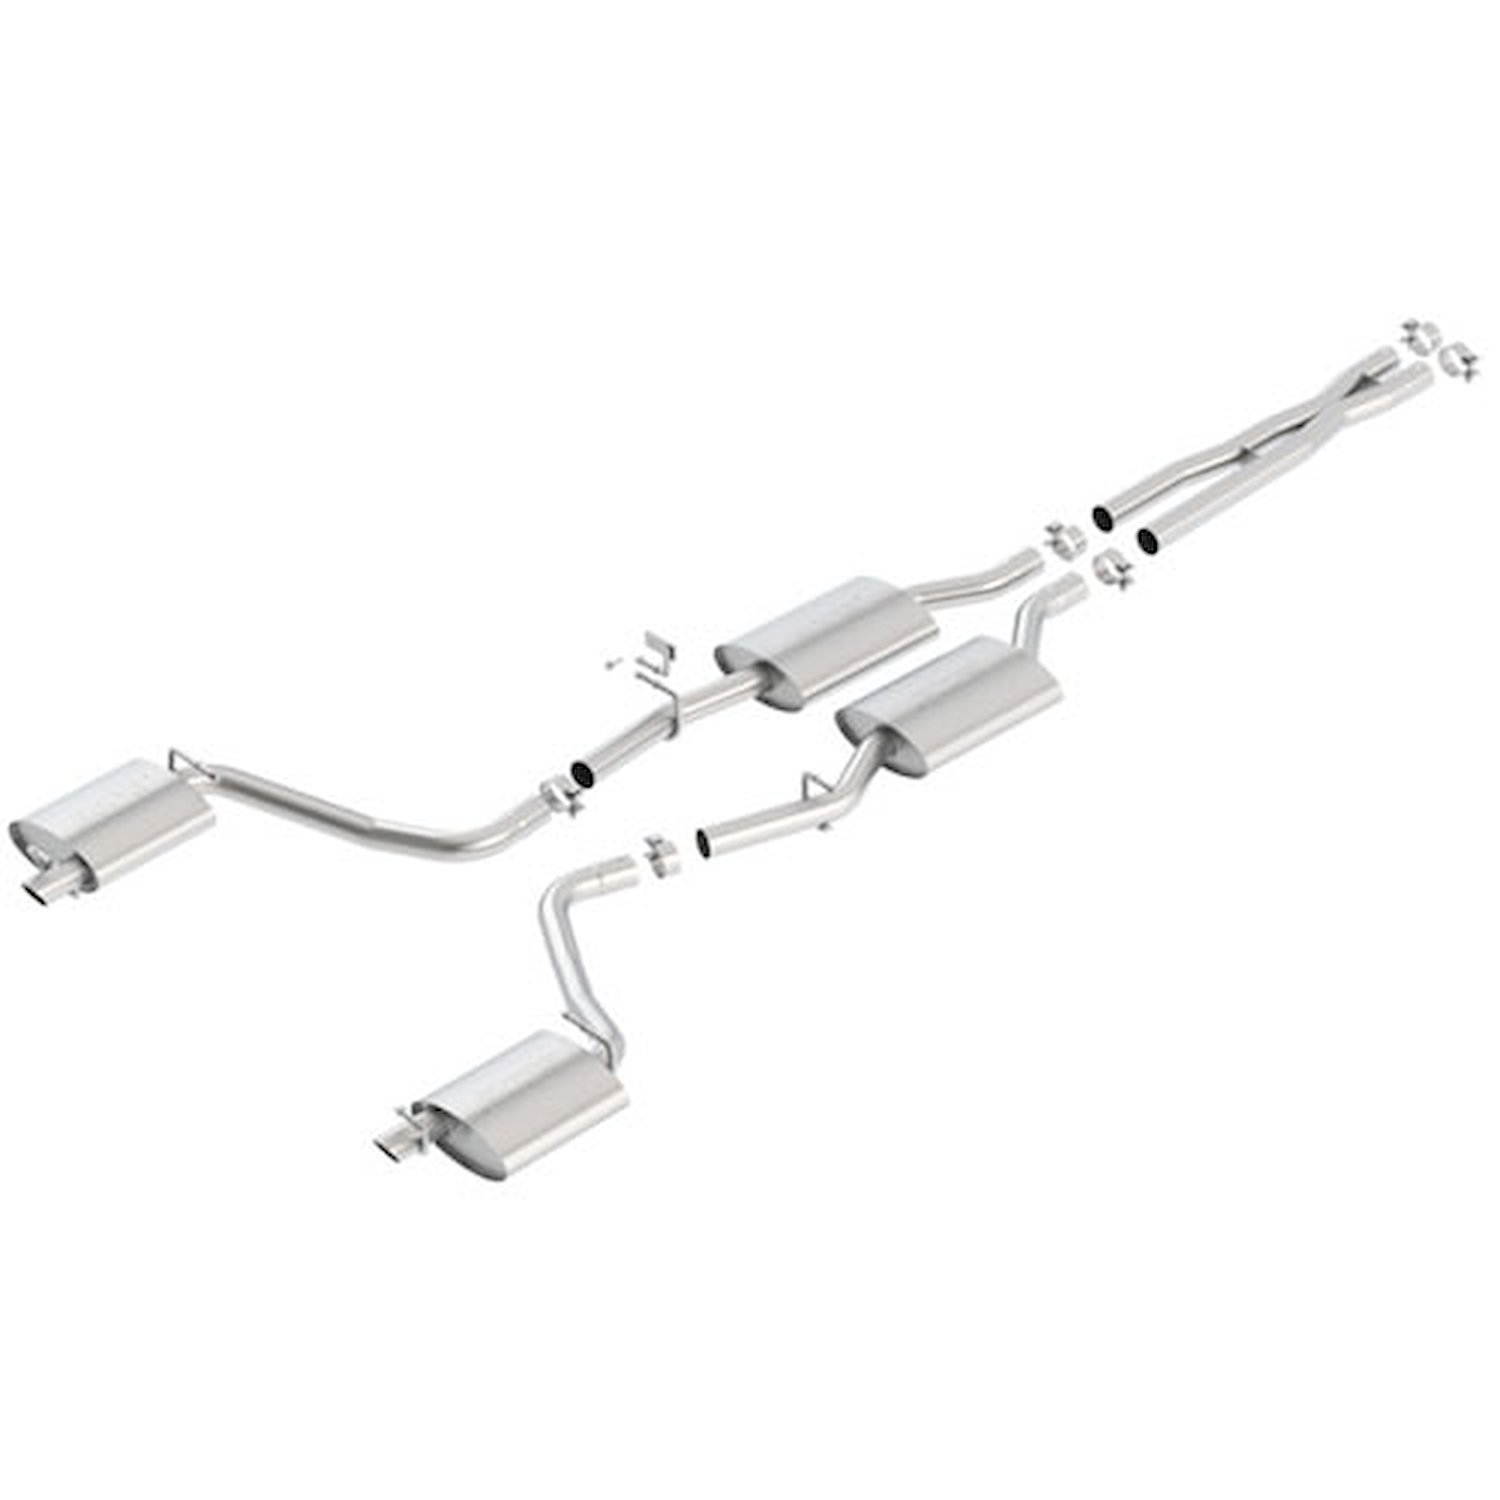 Cat-Back Exhaust System 2015-18 Charger/300 3.6L